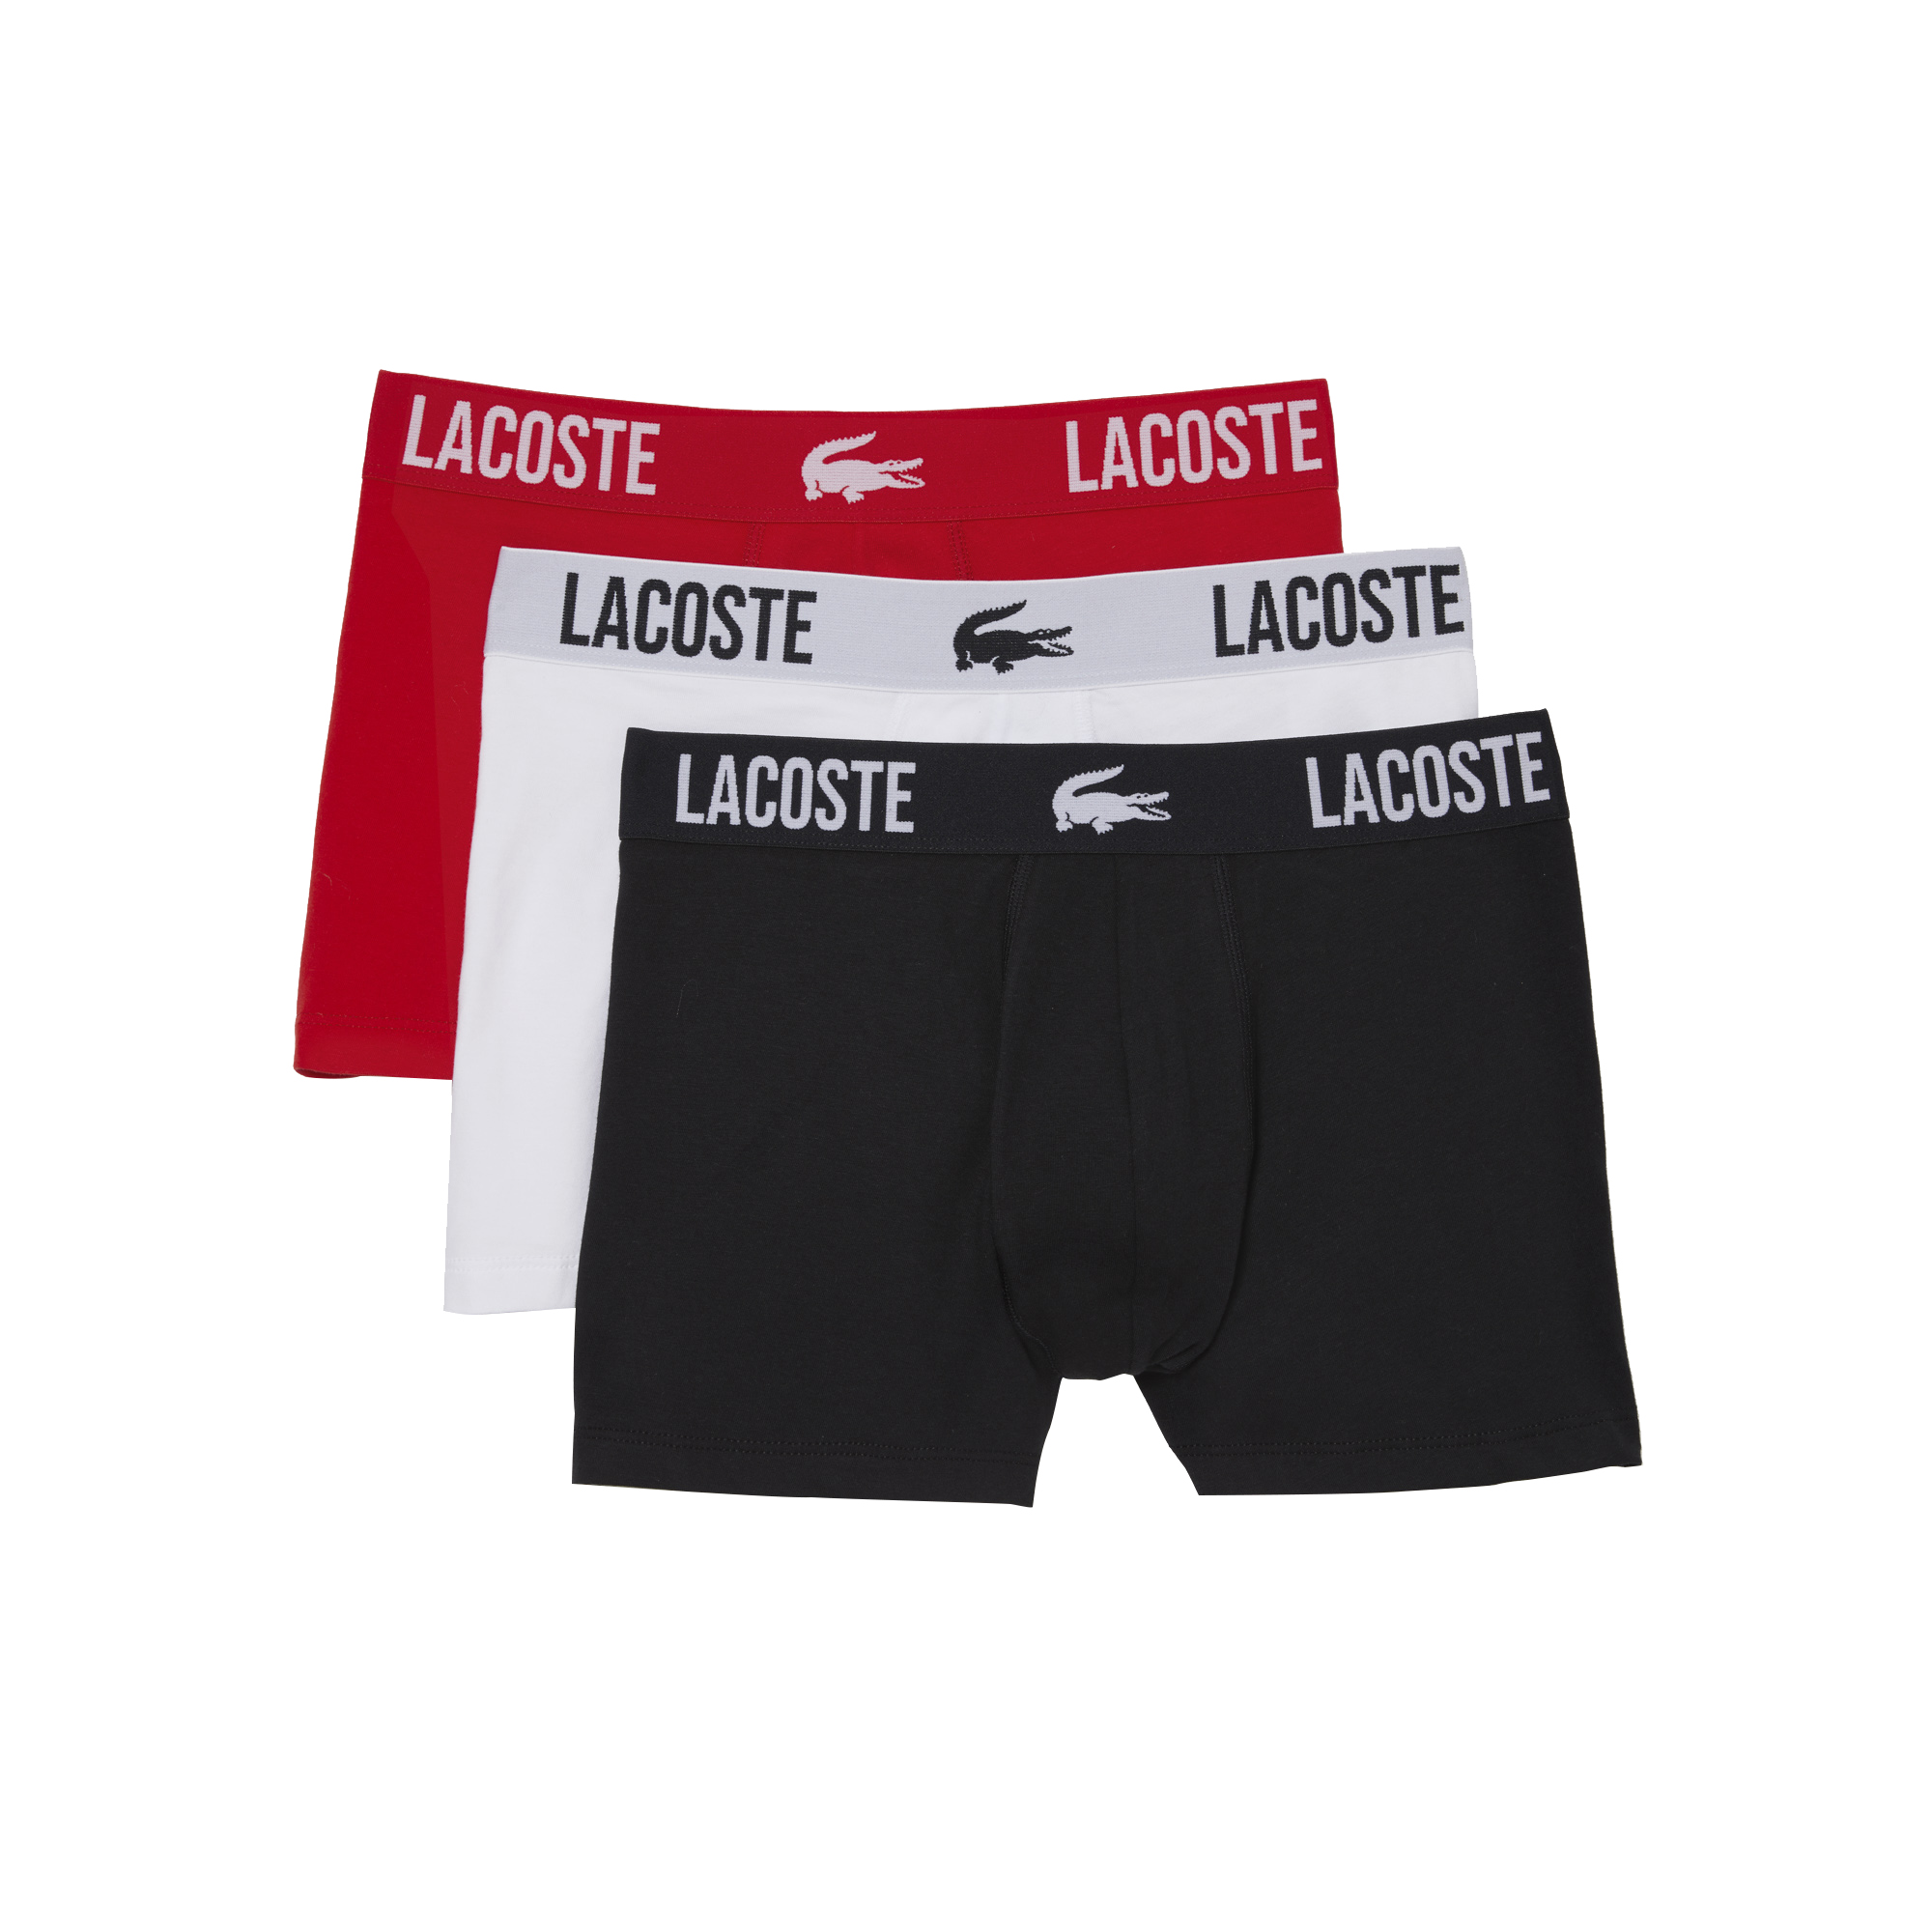 Lacoste Boxers Shorts Men With Printed Logo Black / White / Red